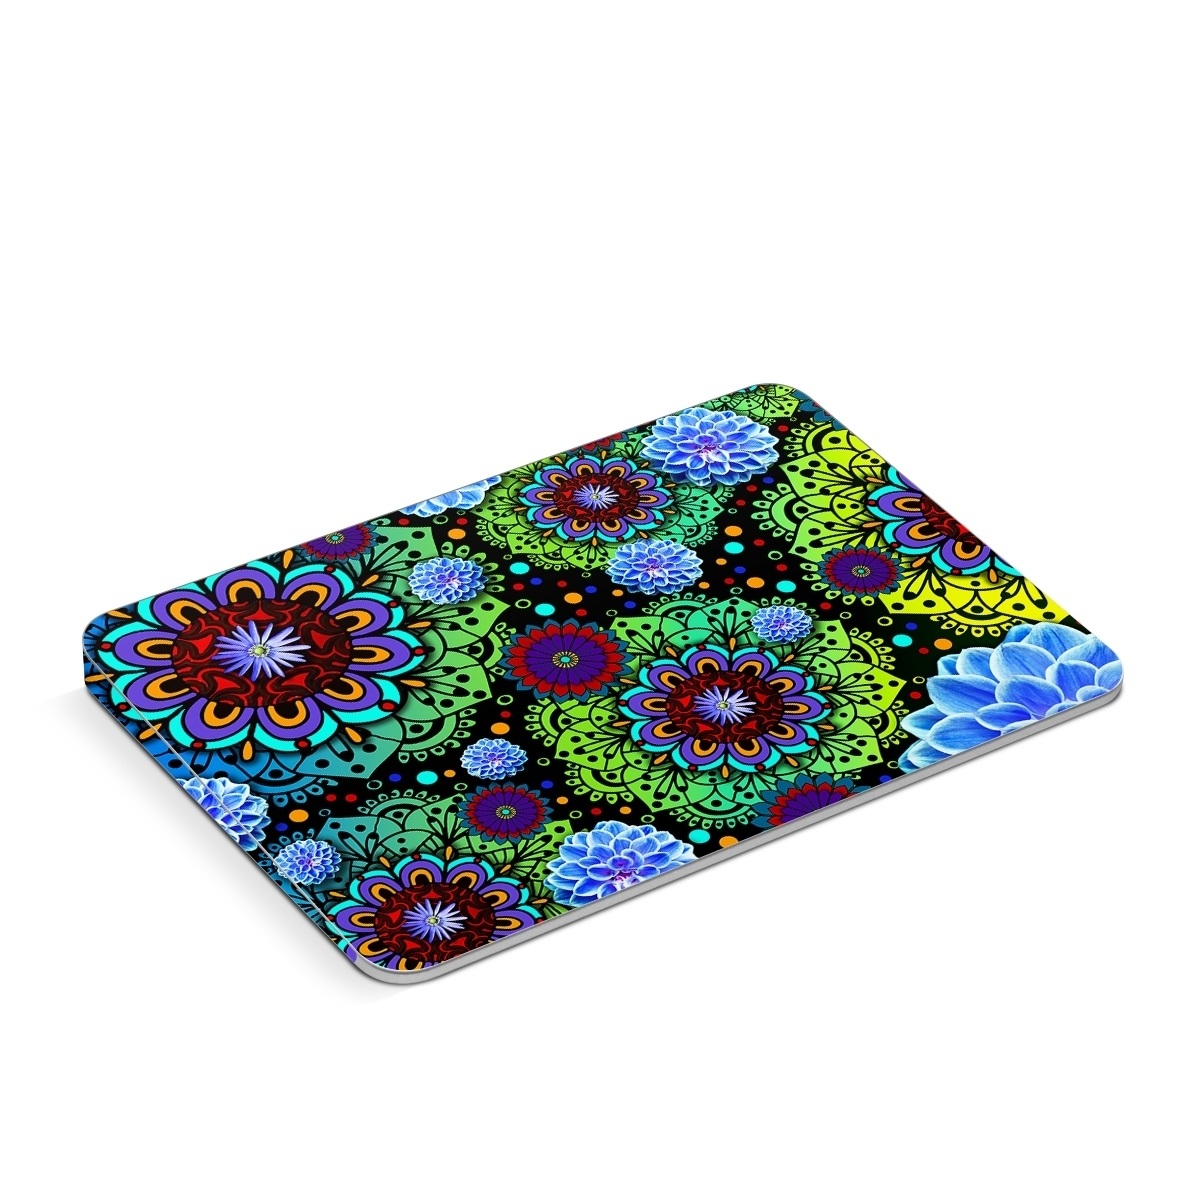 Apple Magic Trackpad Skin design of Pattern, Psychedelic art, Design, Flower, Art, Visual arts, Floral design, Plant, Textile, Symmetry, with black, blue, green, purple colors